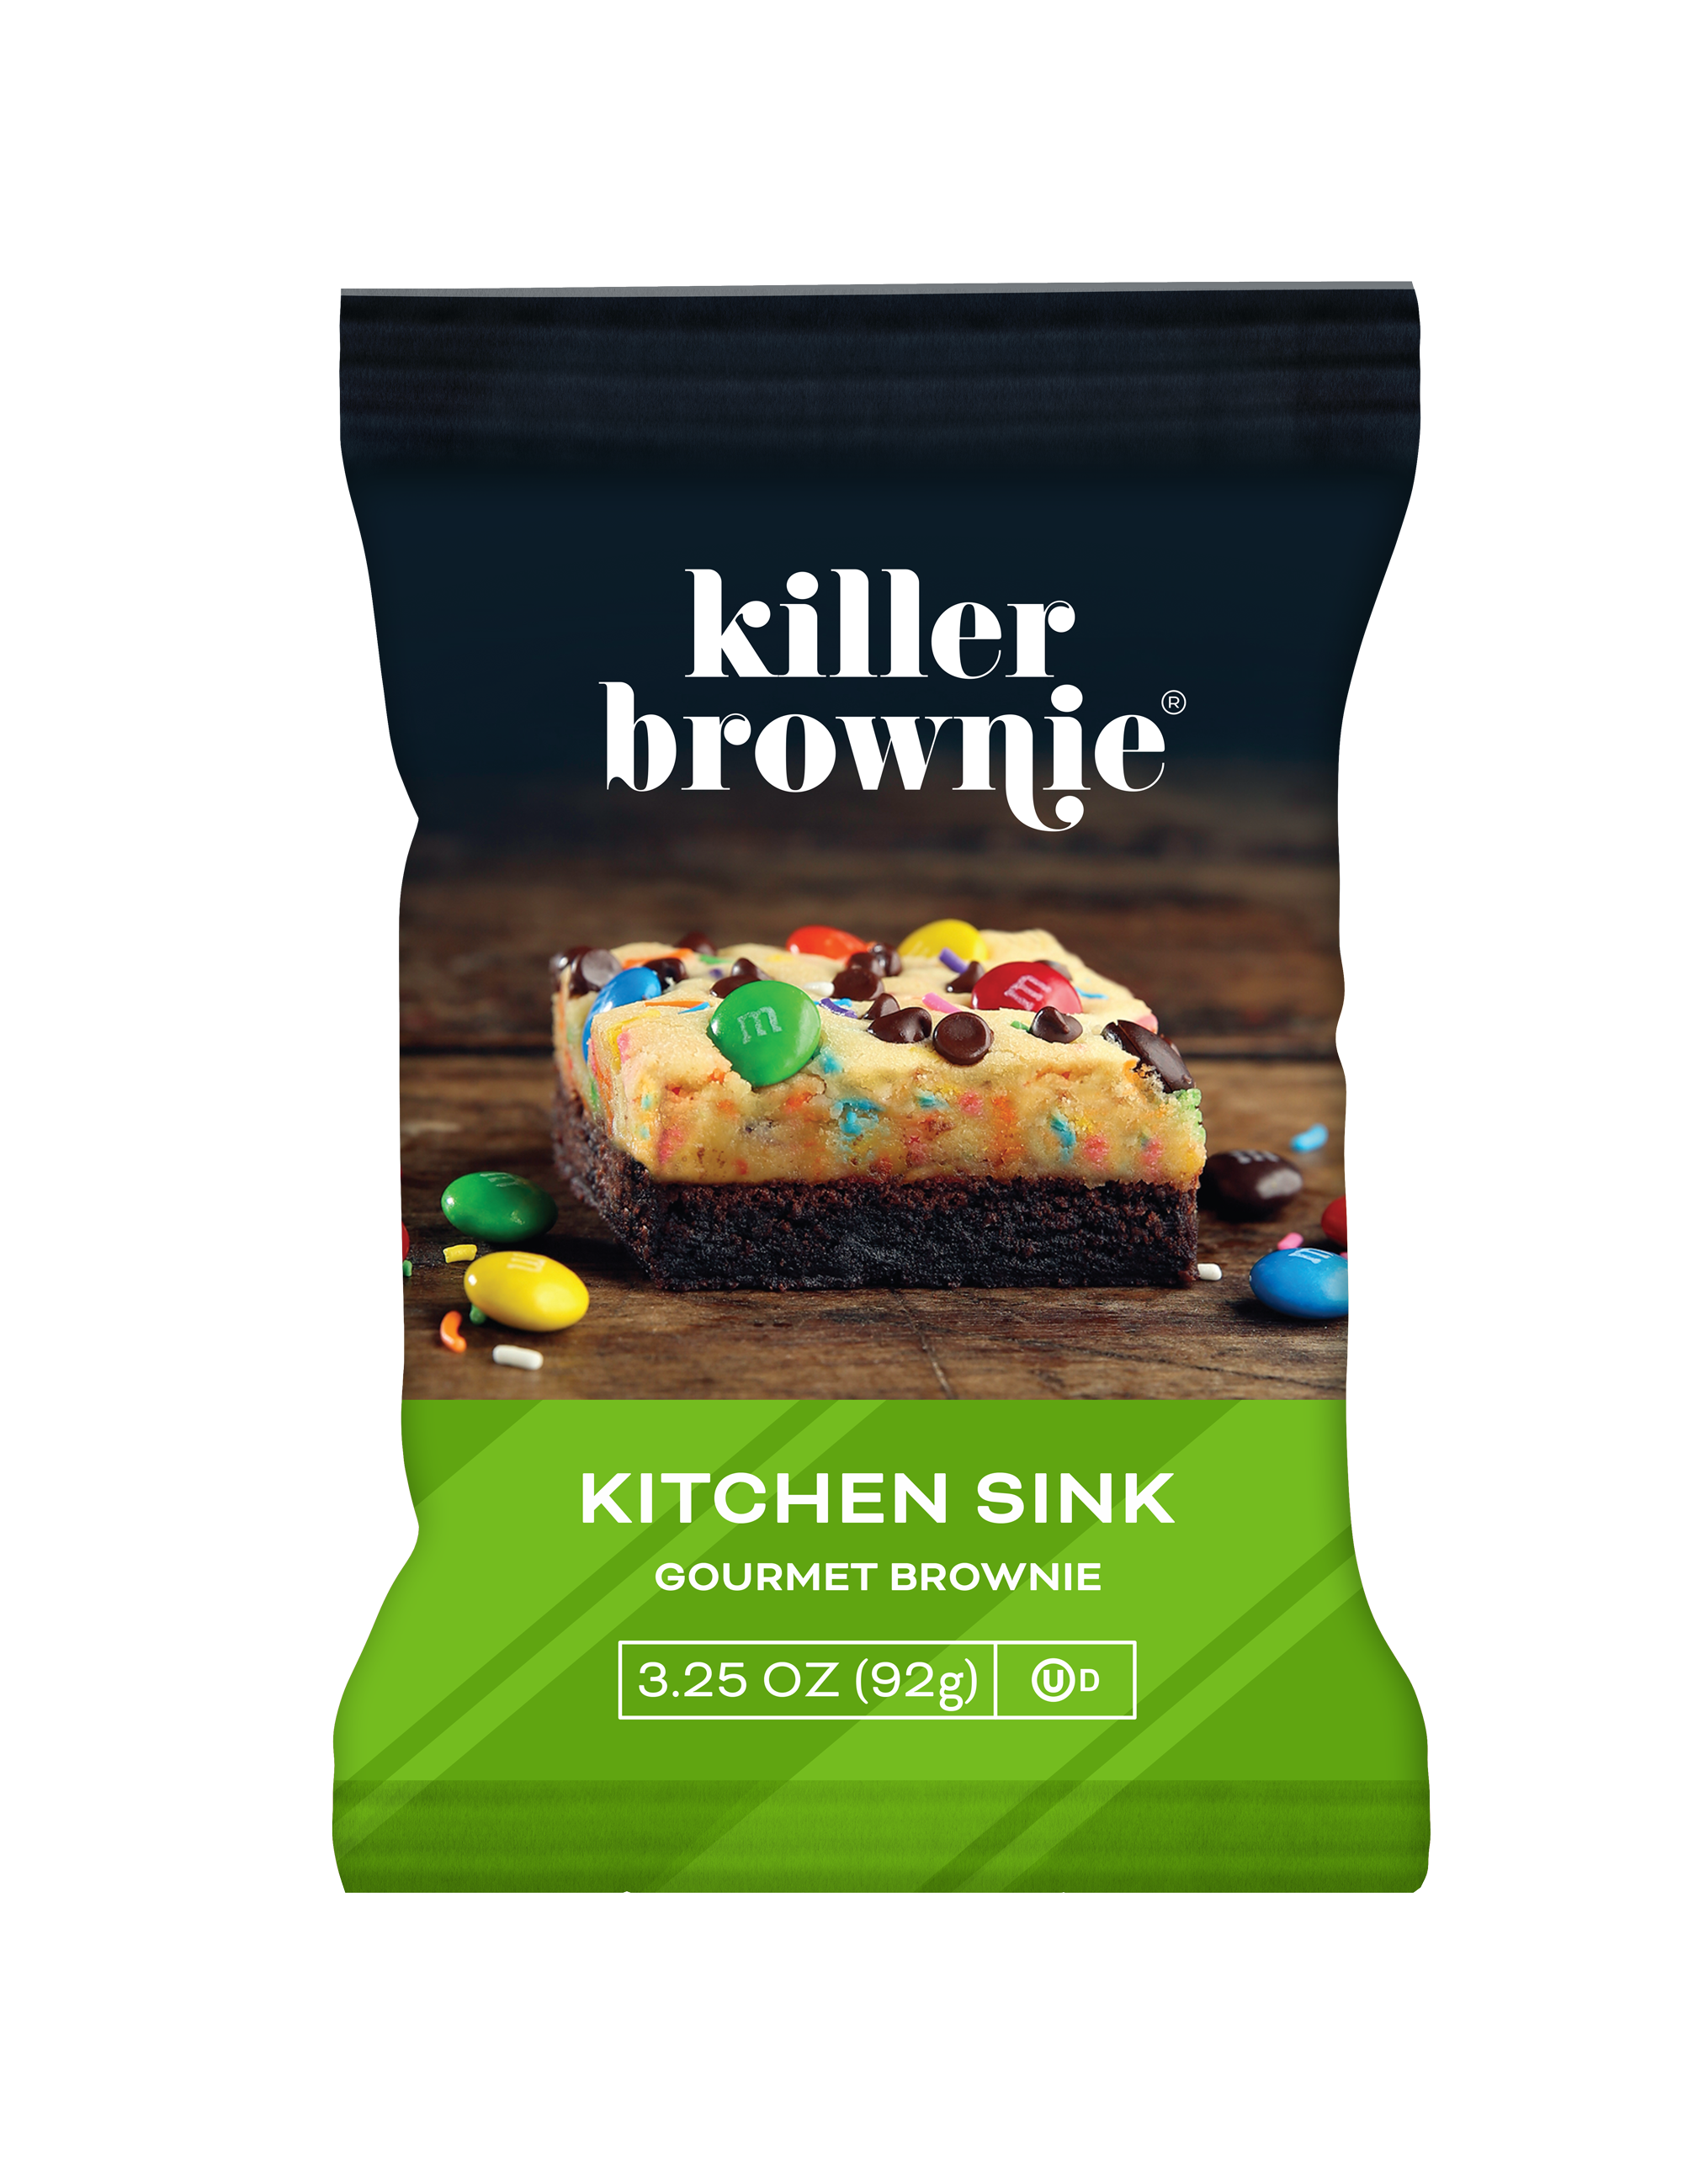 Killer Brownie Company Launches Individually-Wrapped Kitchen Sink Brownies for Distribution to Grocery Stores, C-Stores, Restaurants and More thumbnail